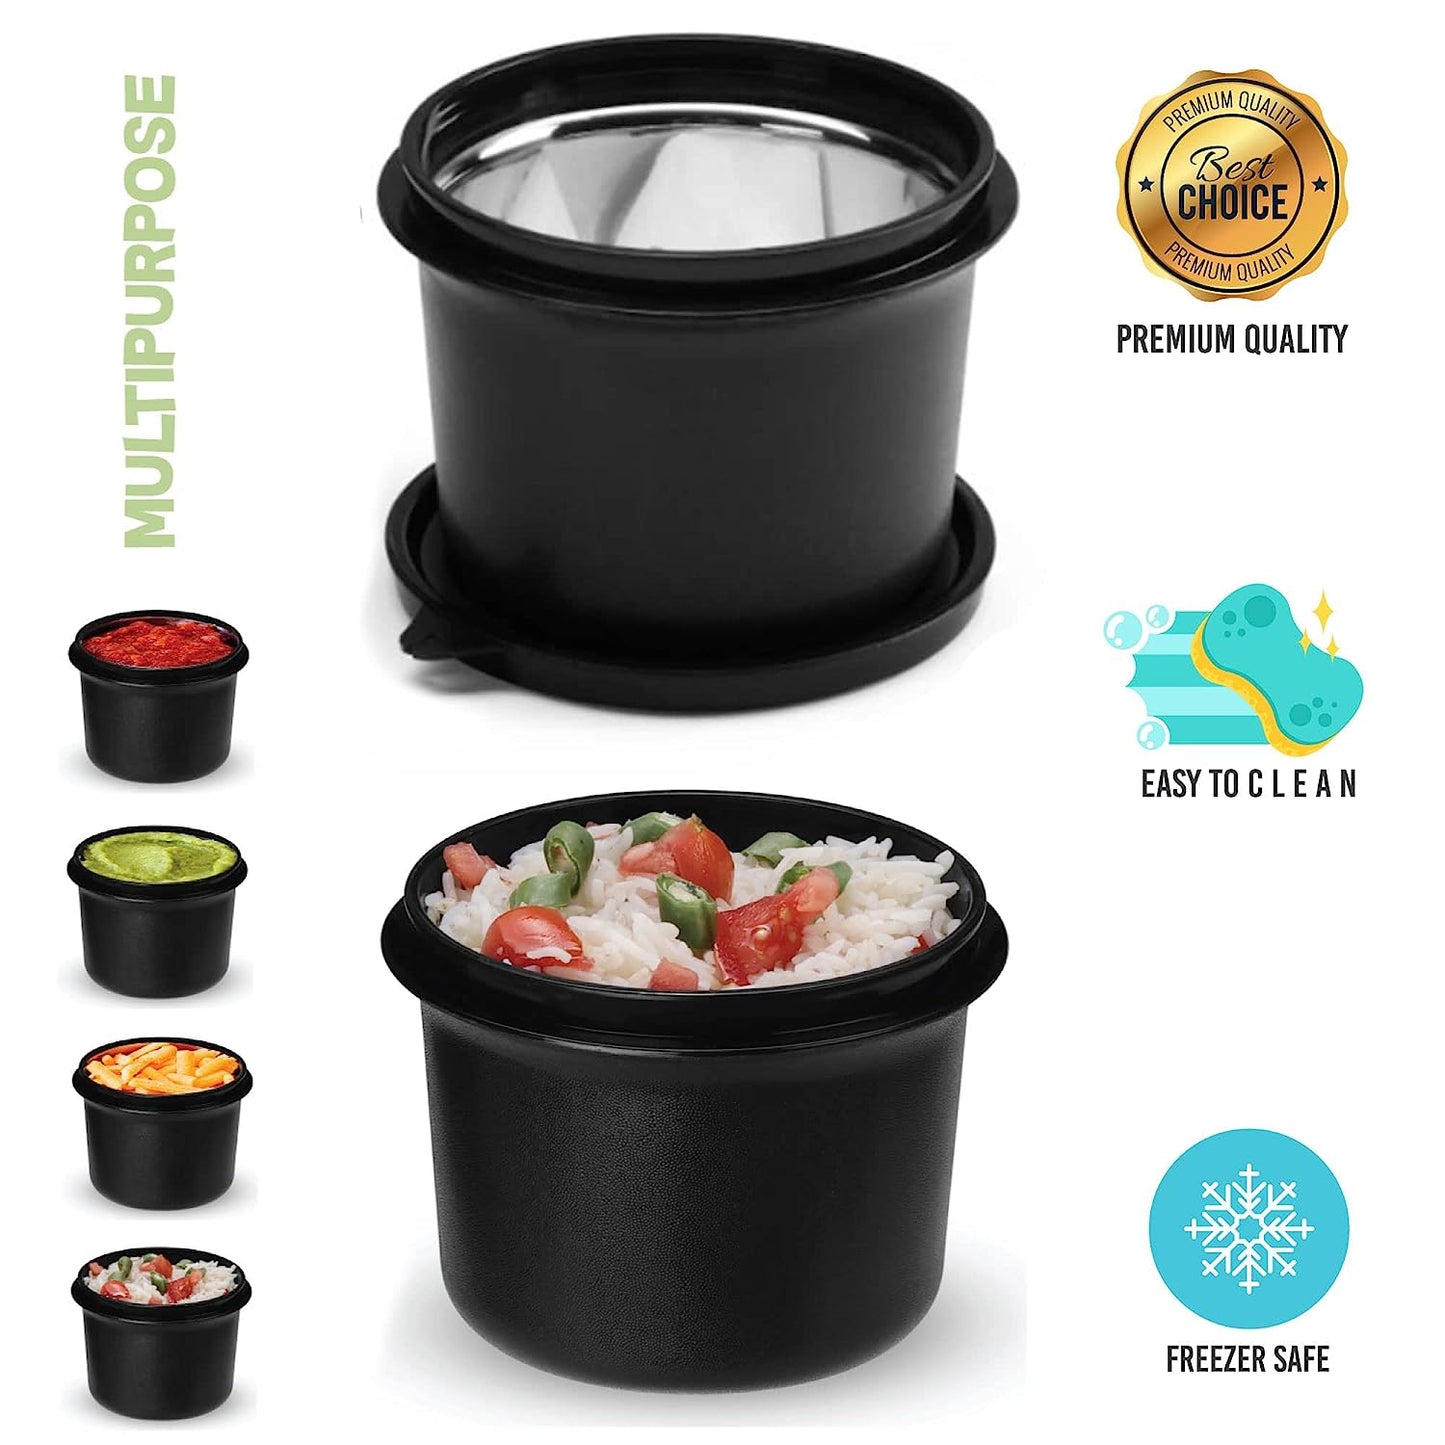 Benny Containers - Set of 2 (600 ML)